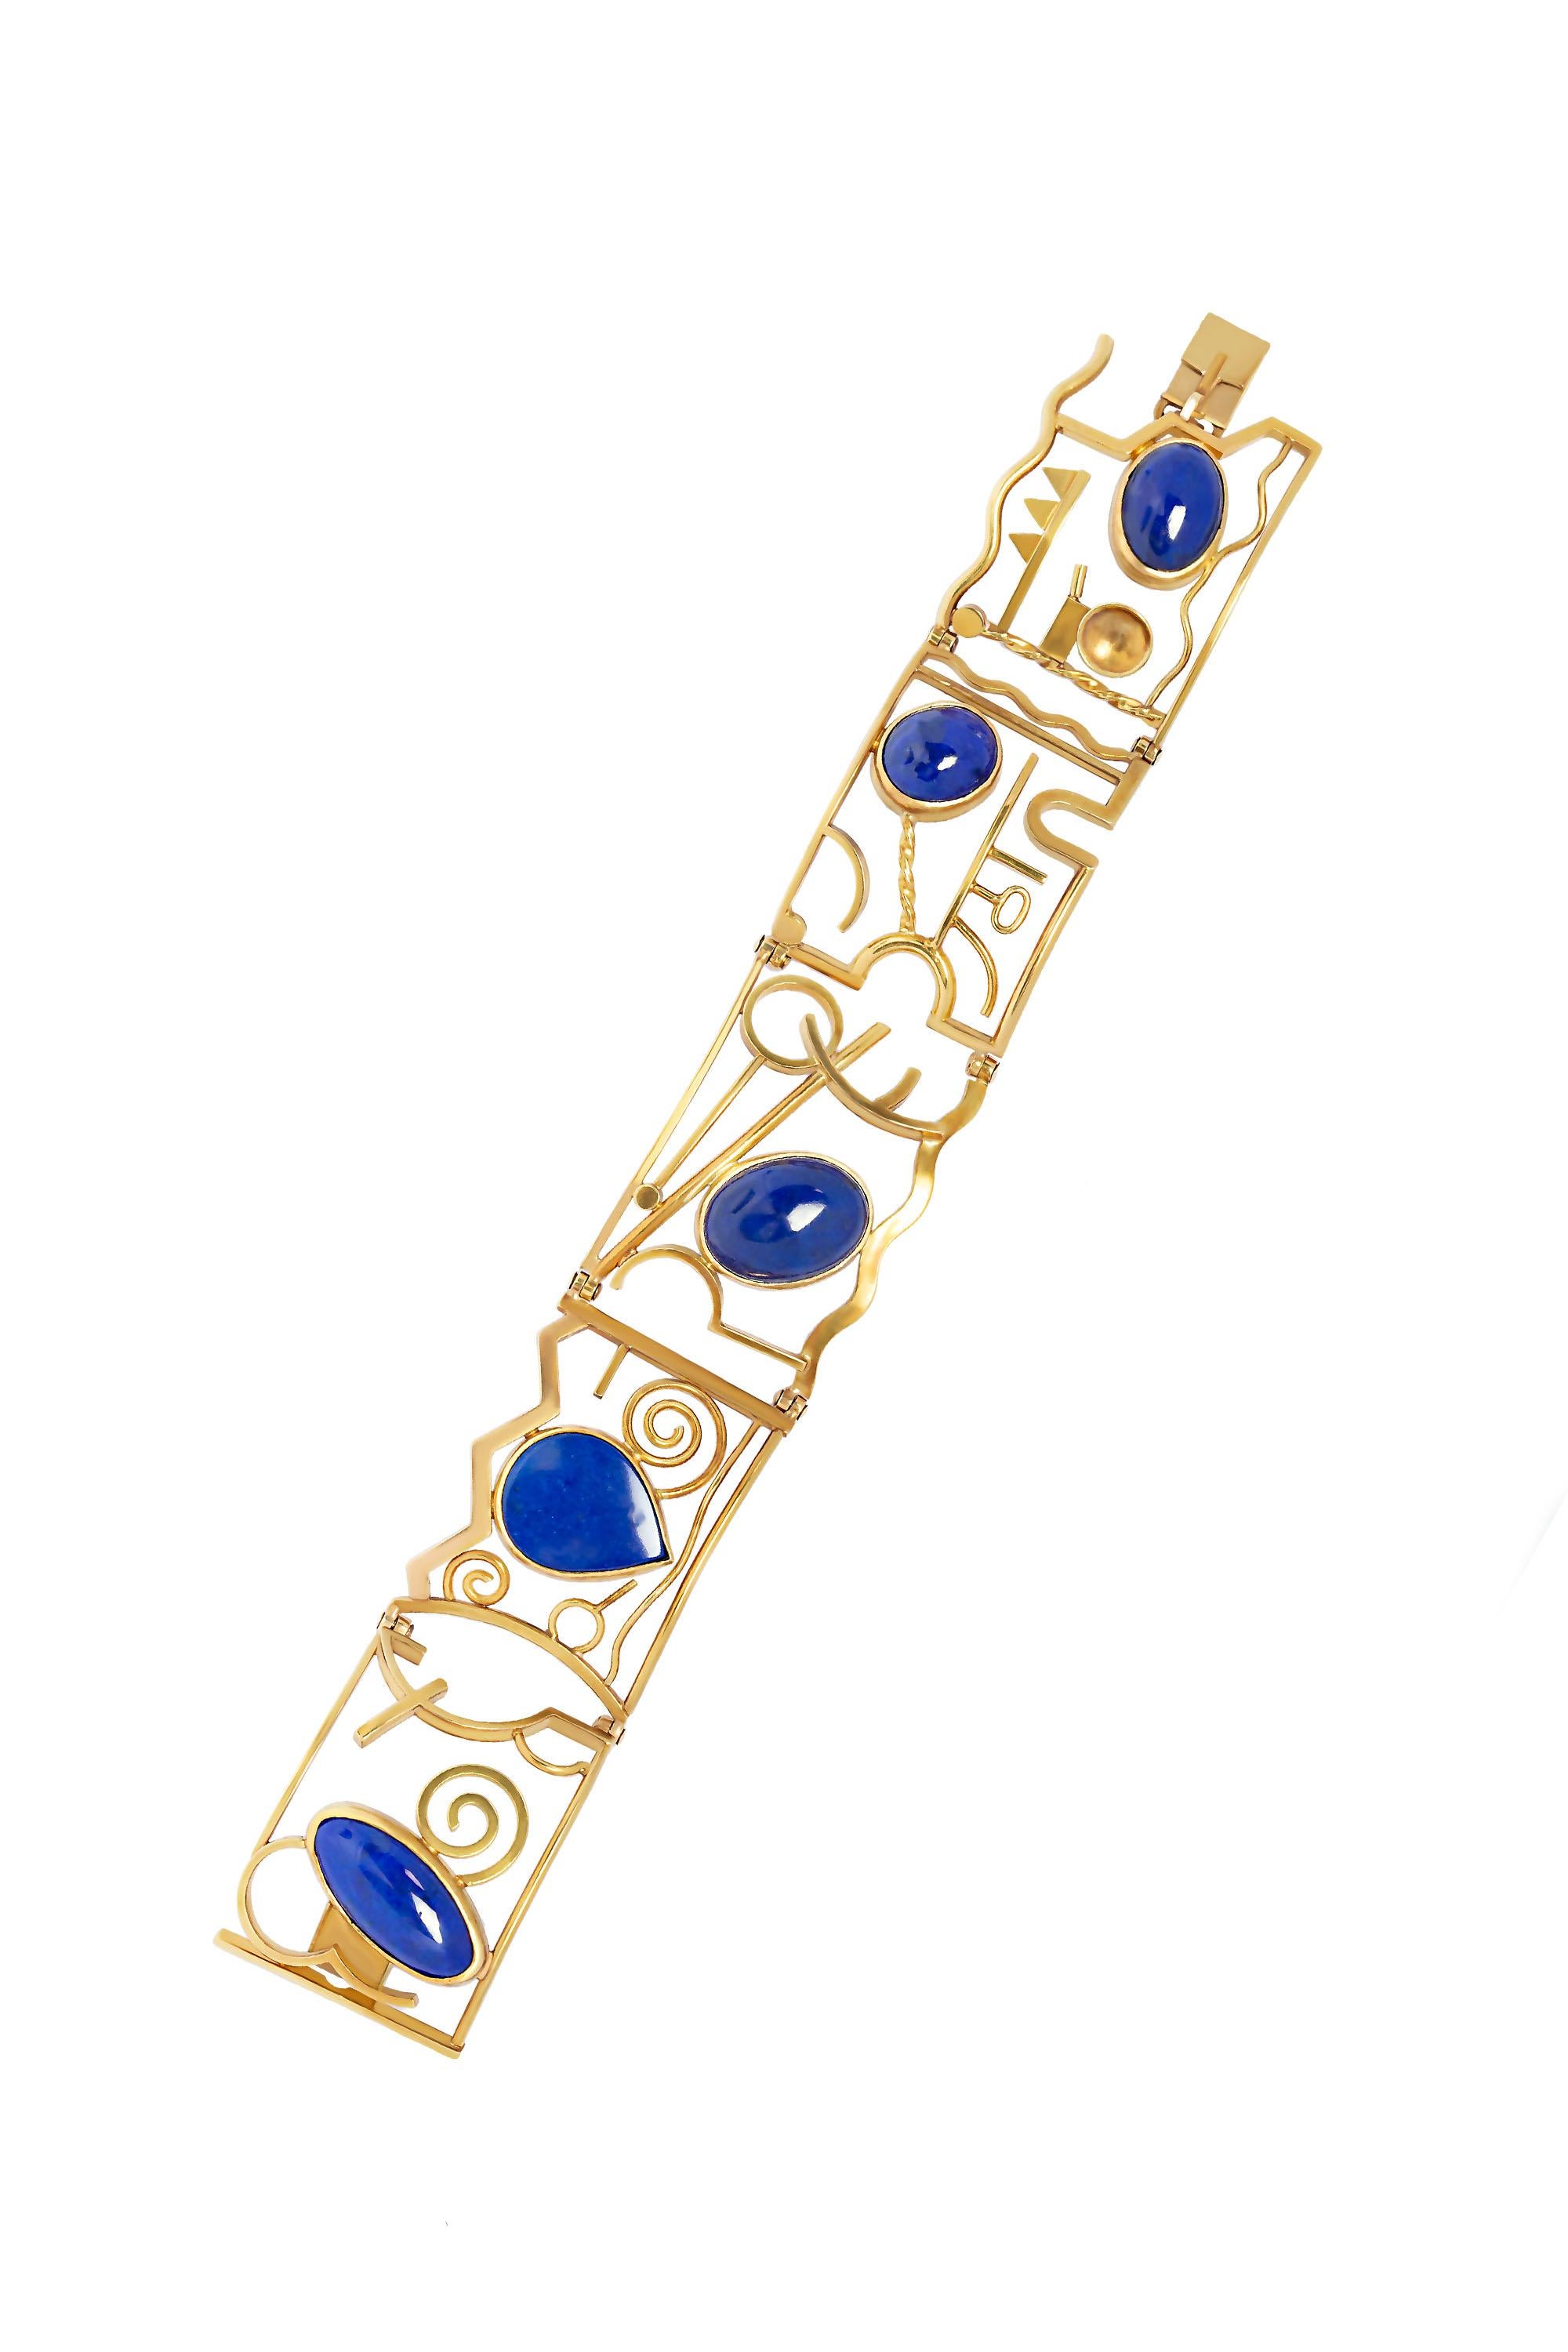 A modern abstract design bracelet with Lapis Lazuli. Handcrafted in 14 karat yellow gold.  Measures 7“ in length. Stamped 14K S.A Shaw